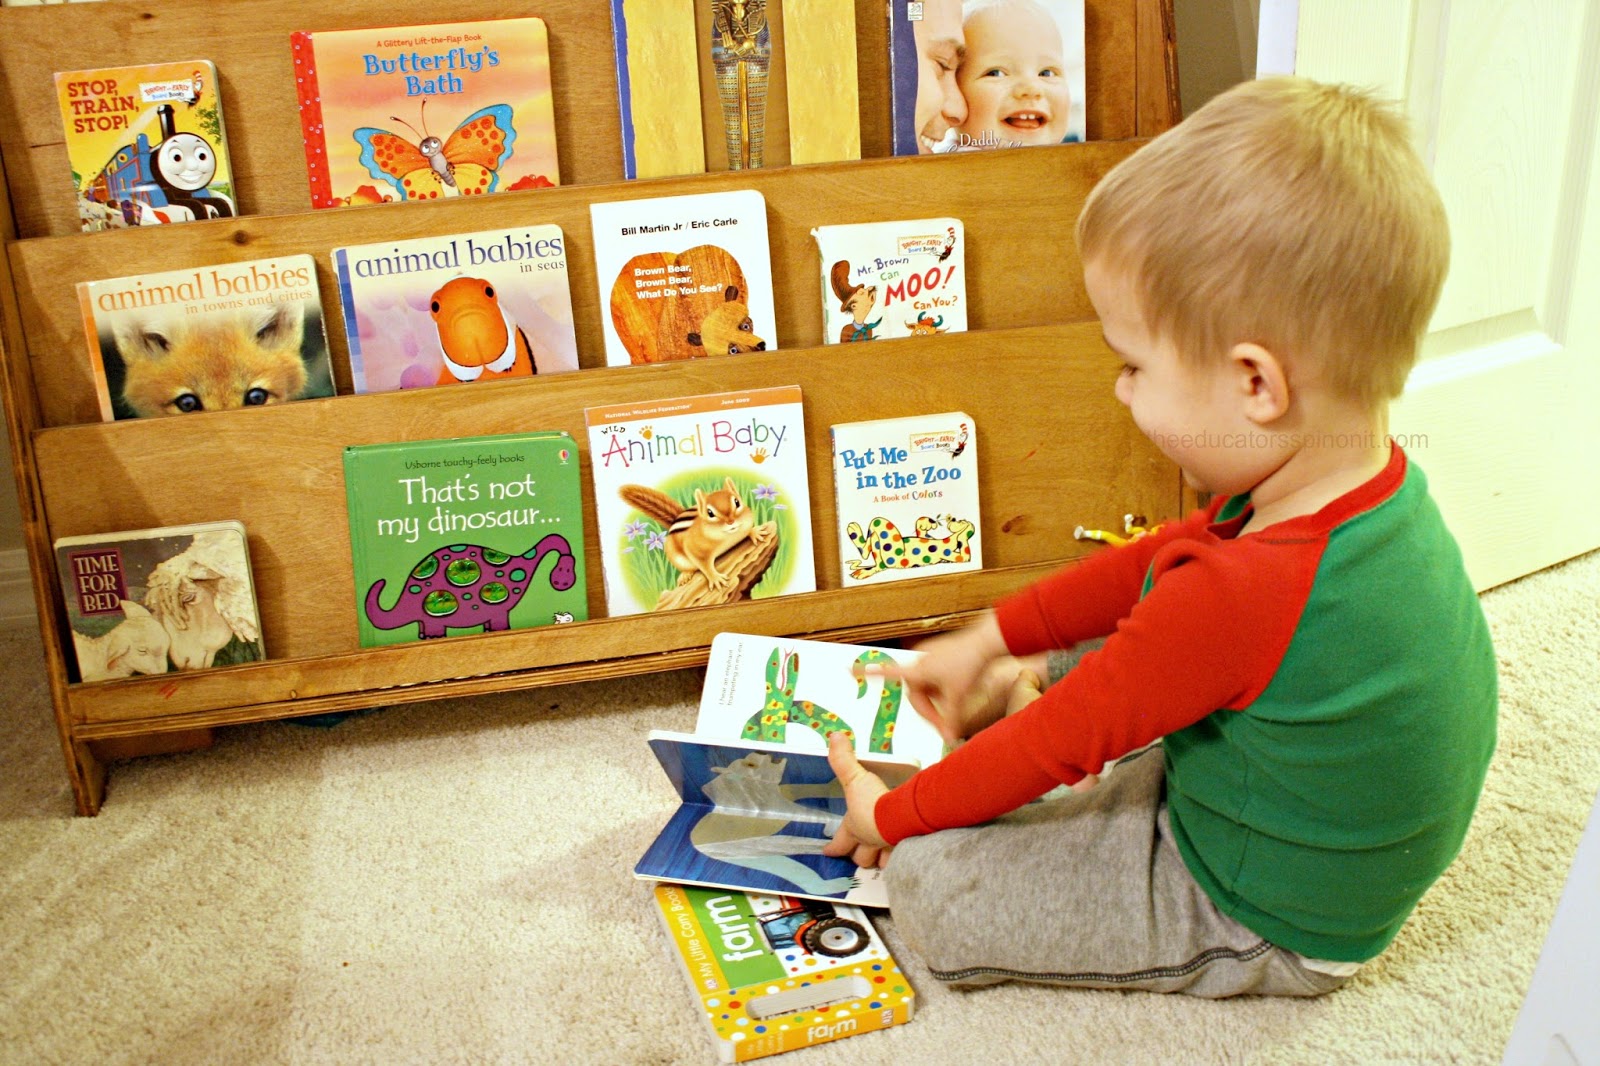 selecting-limiting-and-displaying-books-for-toddlers-the-educators-spin-on-it